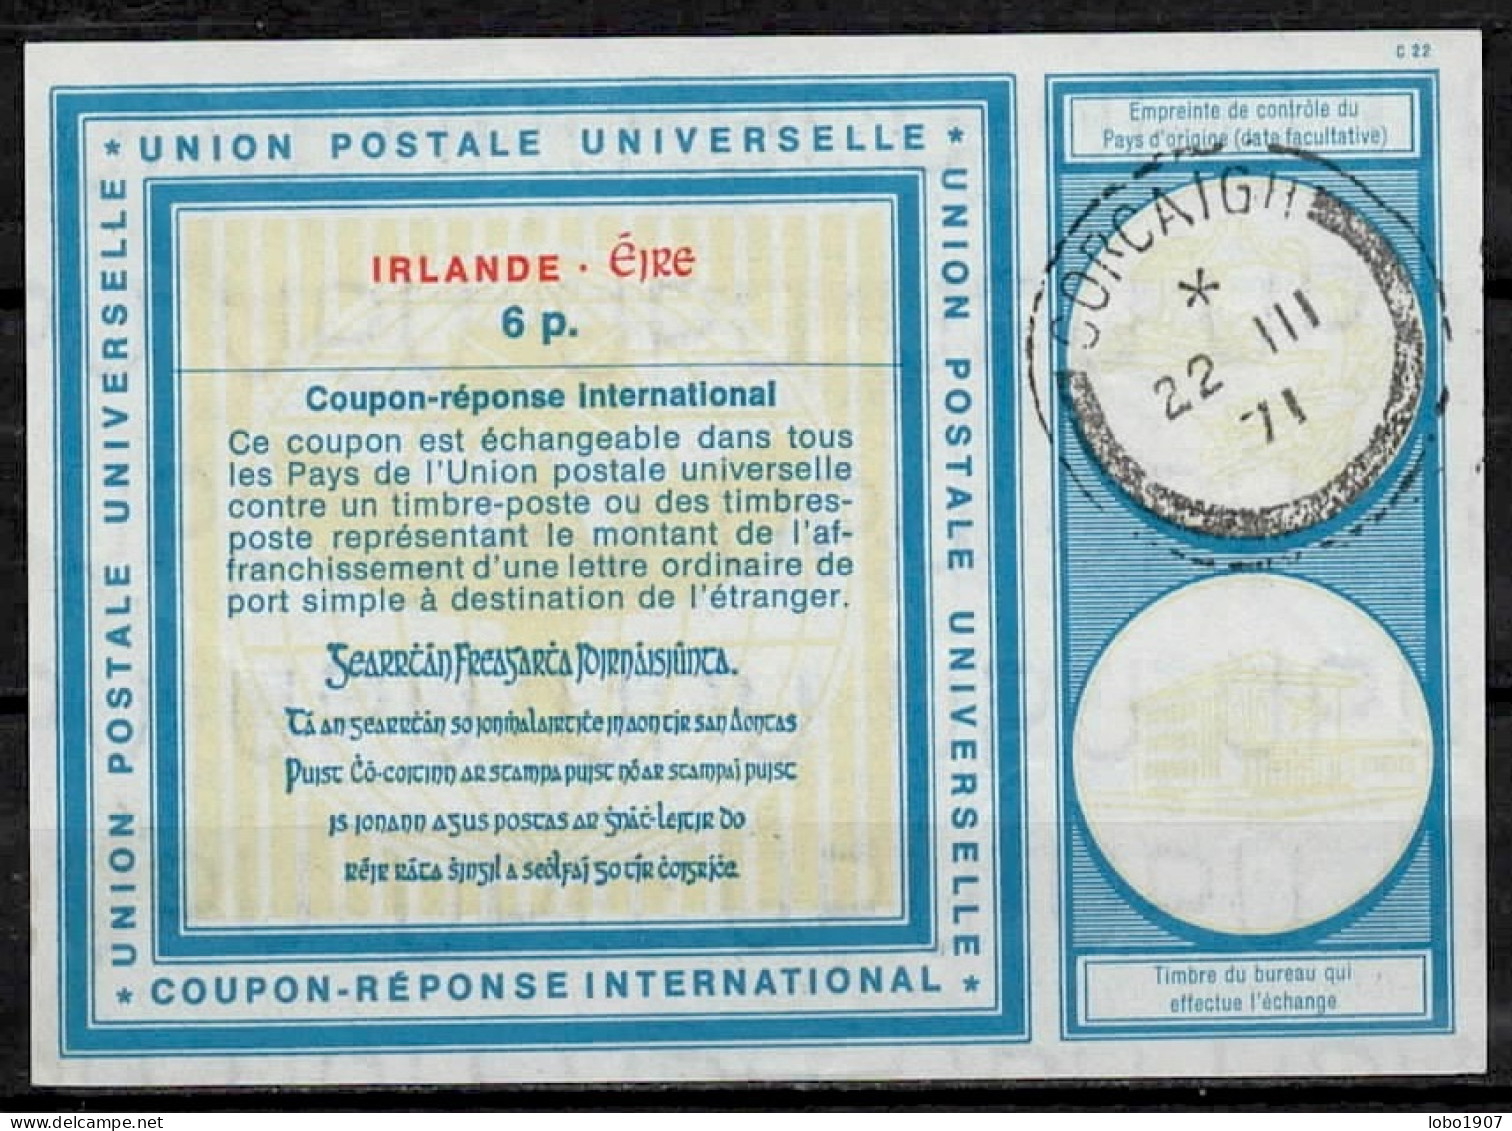 IRLANDE IRELAND ÉIRE  Vi19 6p.  International Reply Coupon Reponse Antwortschein IRC IAS O CORCAIGH  22.03.71 - Postal Stationery